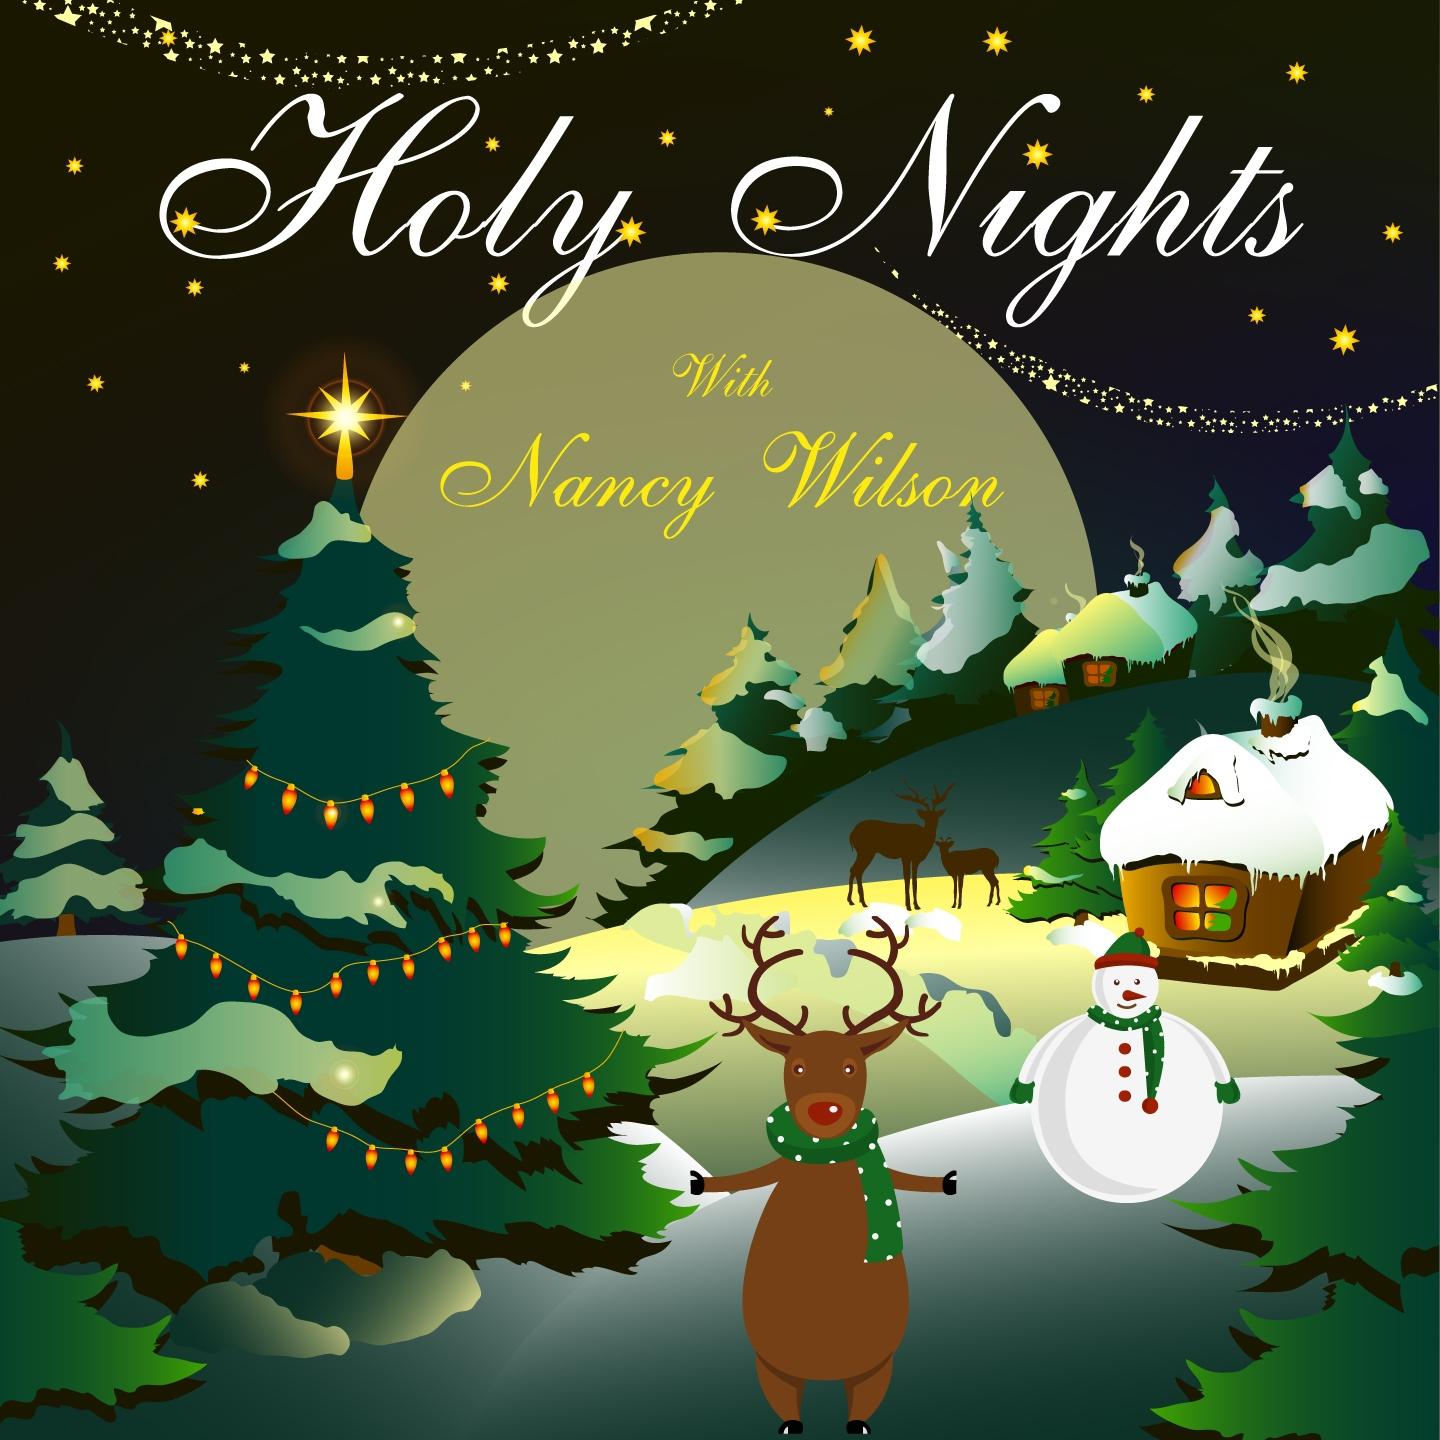 Holy Nights With Nancy Wilson